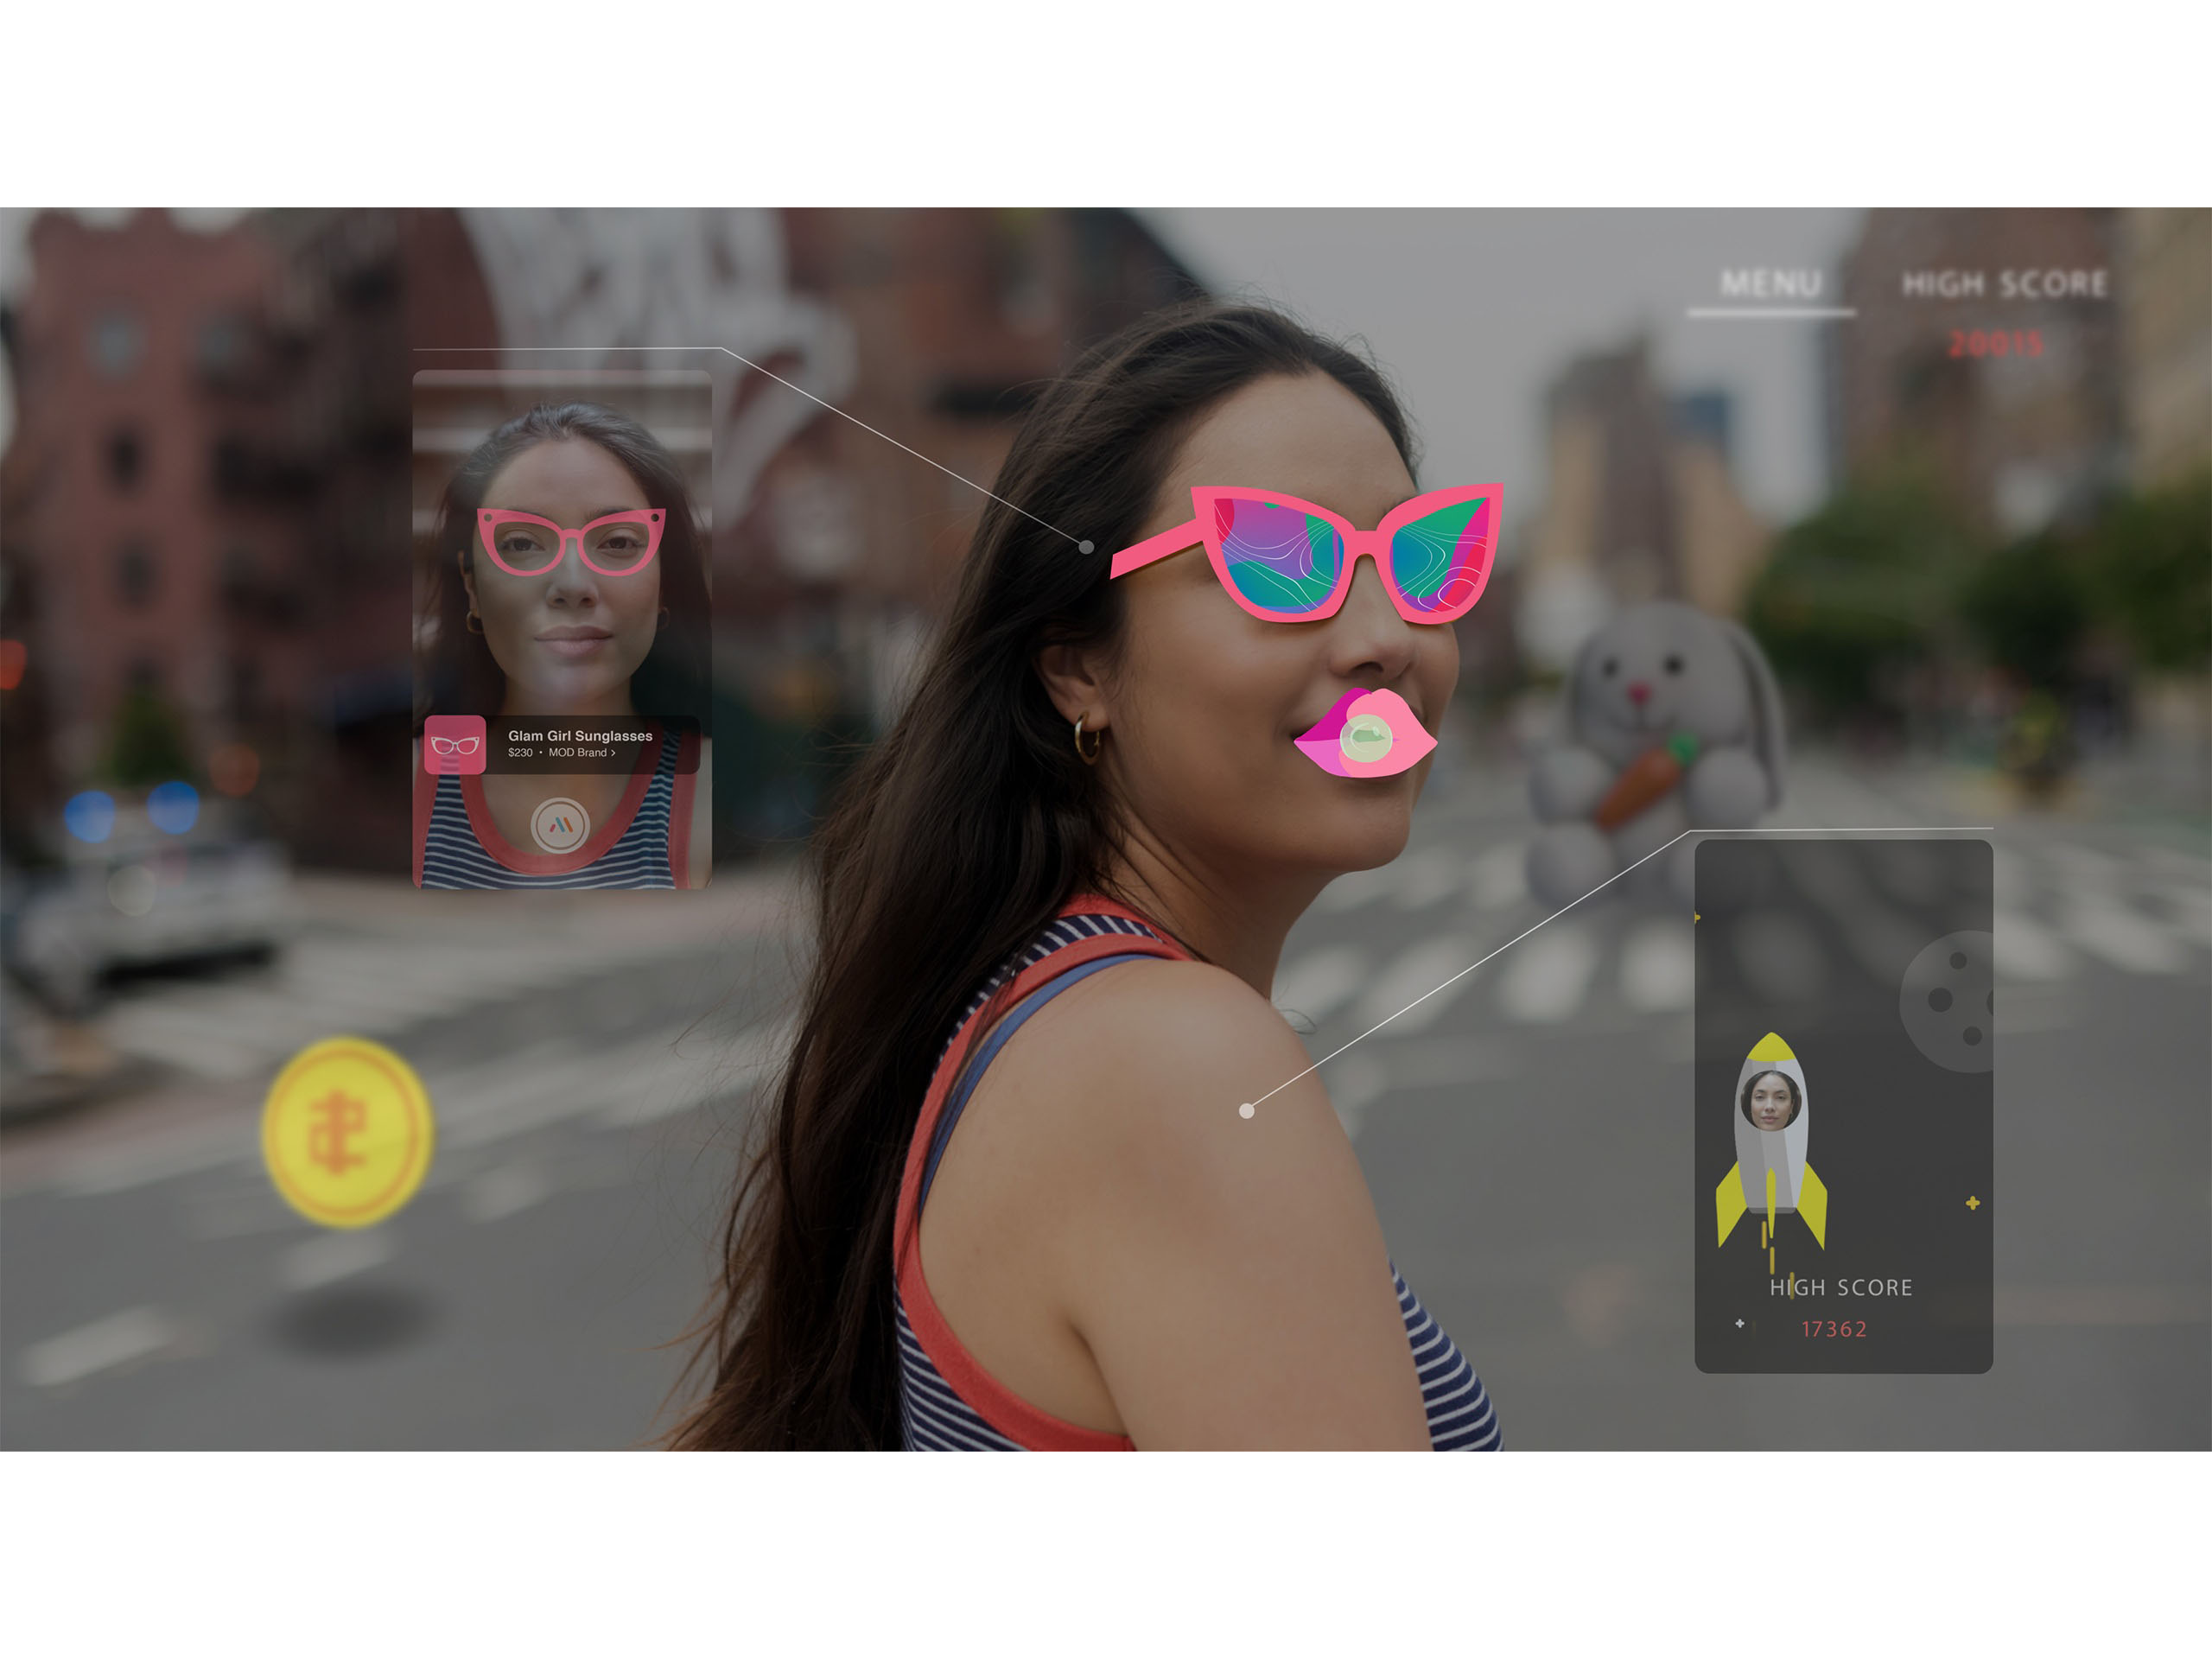 New study by Mediabrands, UM & Snap reveals AR best practices to optimize purchase journey